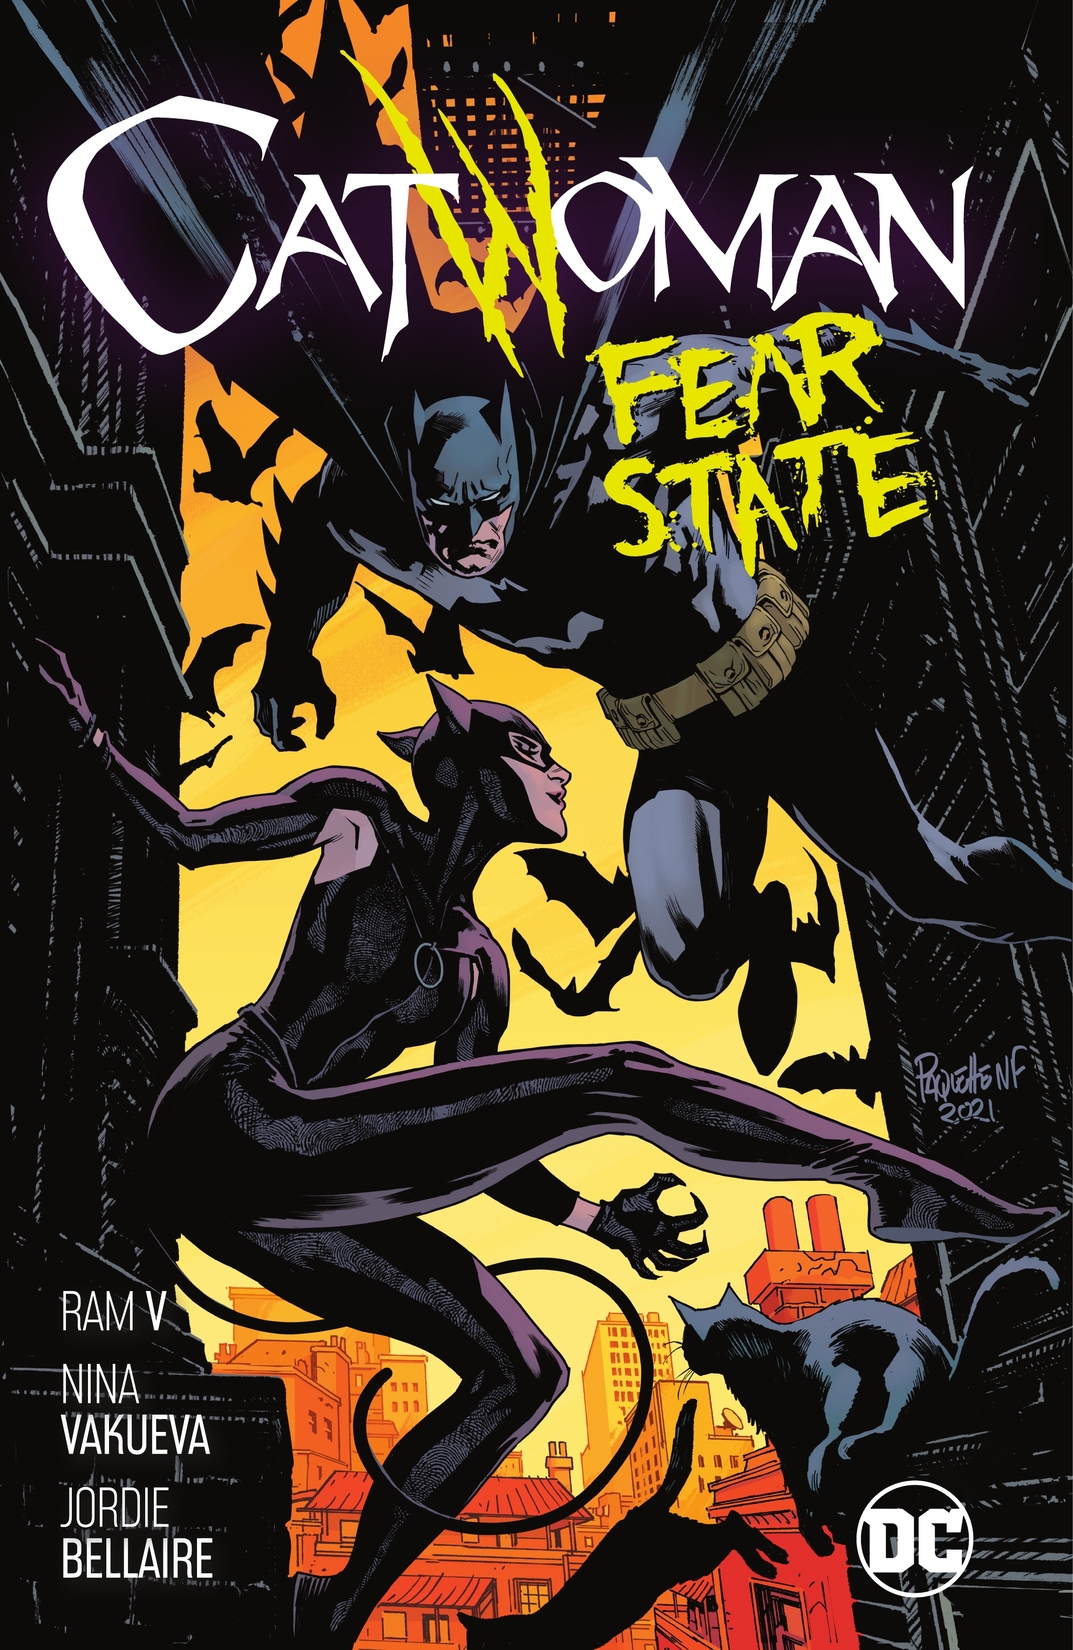 Catwoman Vol. 6: Fear State preview images